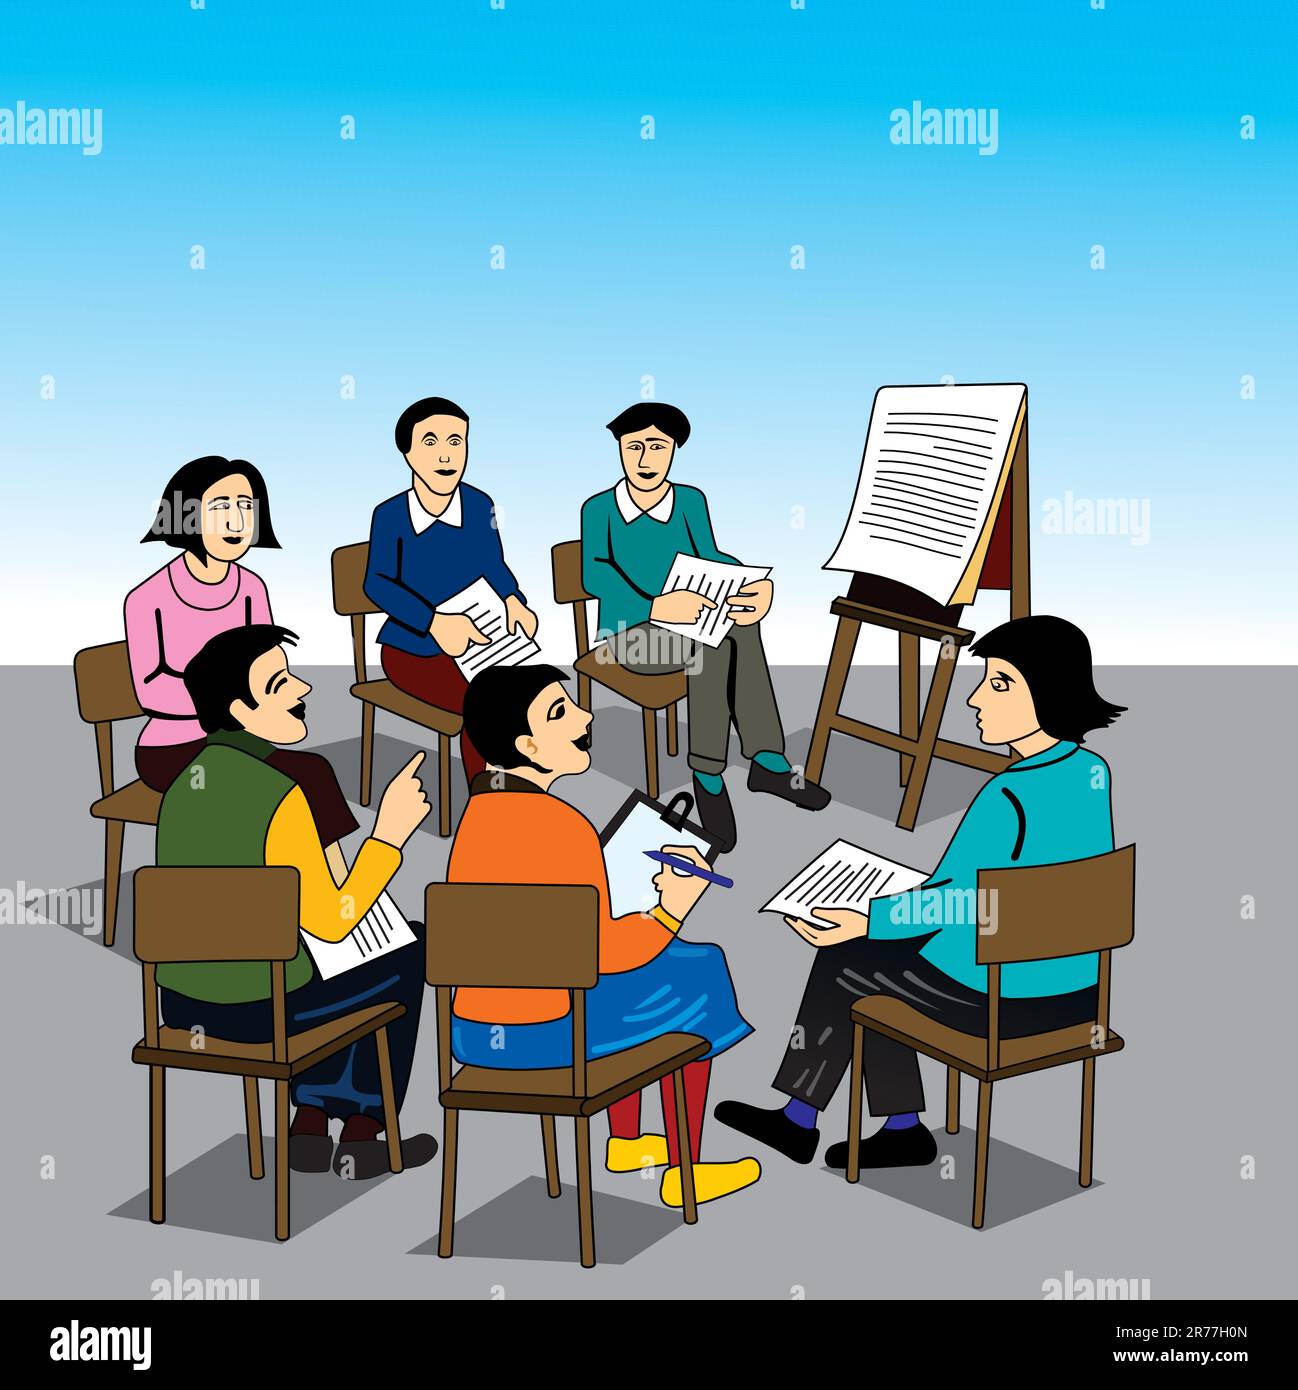 group discussion between professional Stock Vector